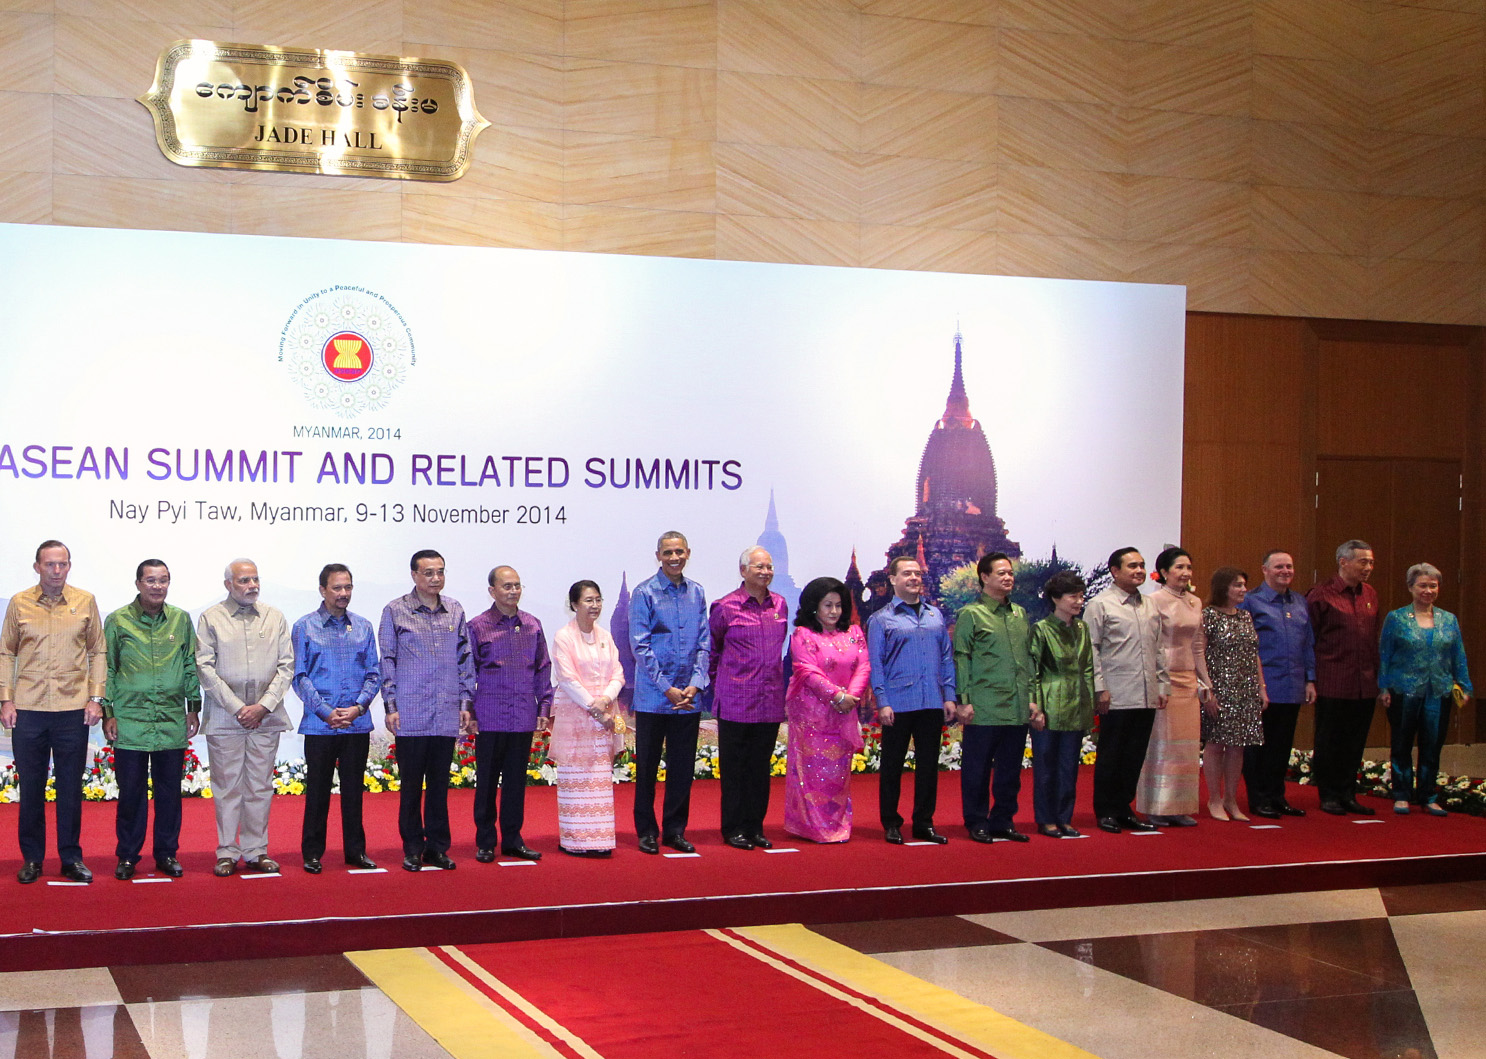 Prime Minister Lee Hsien Loong at the 25th ASEAN Summit in Nay Pyi Taw, Myanmar from 12 to 13 Nov 2014 (Zaobao Photos © Singapore Press Holdings Limited)